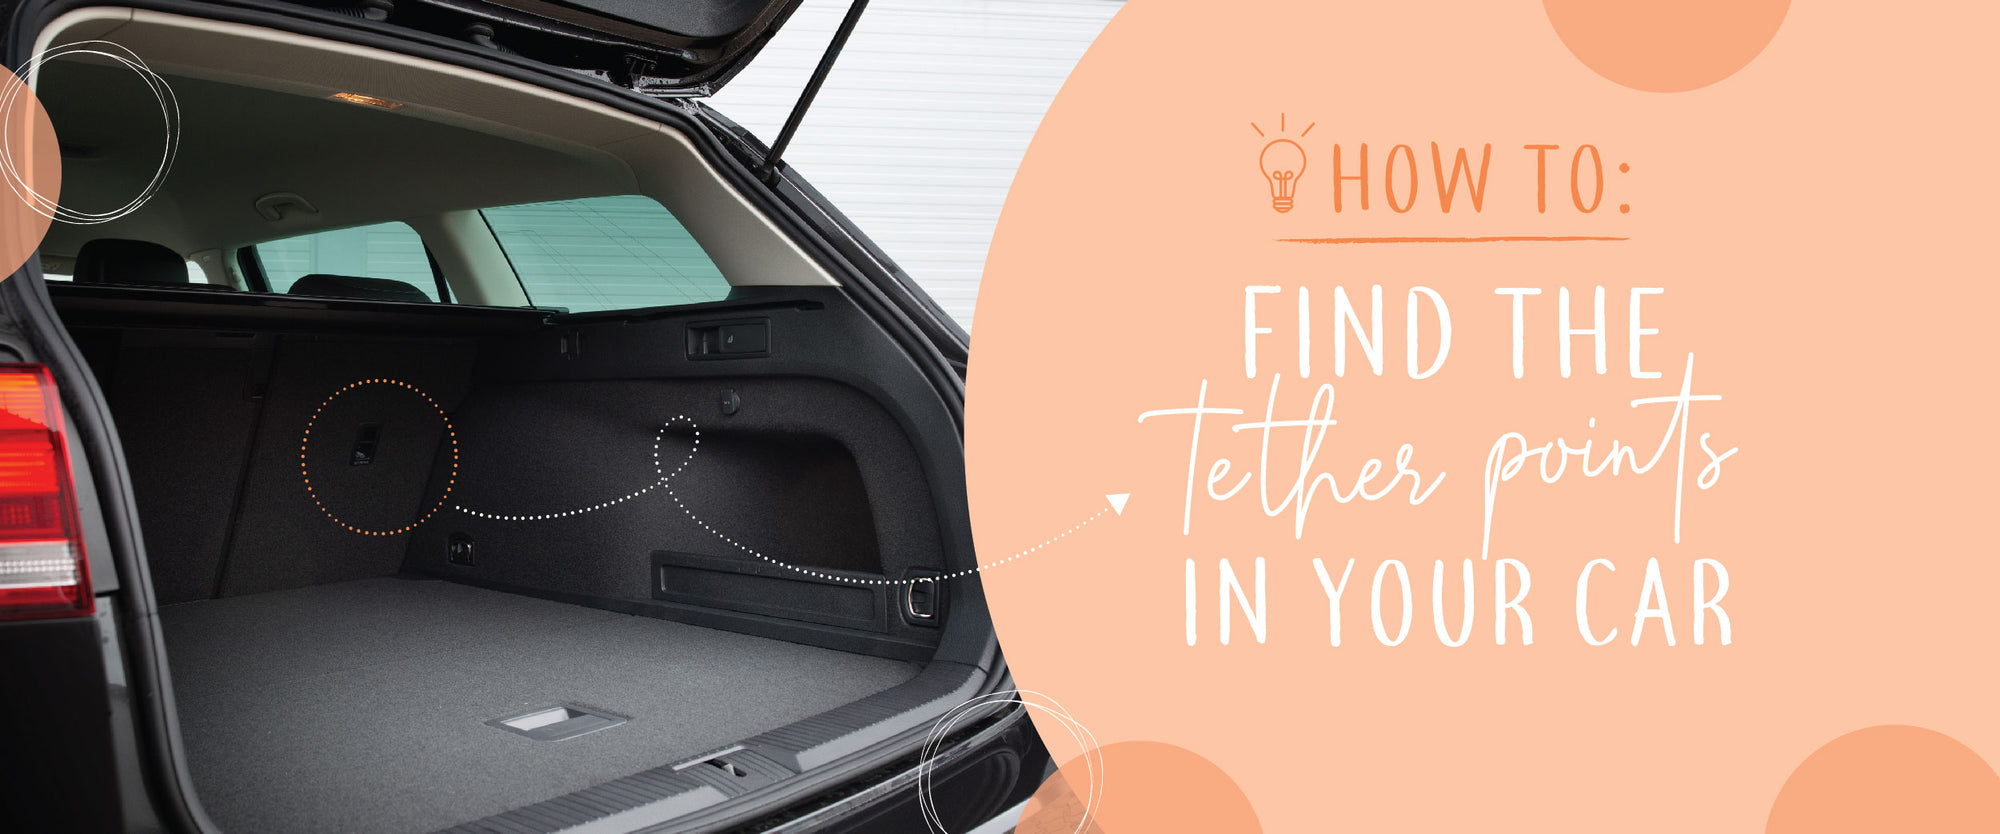 How to find the tether points in your car